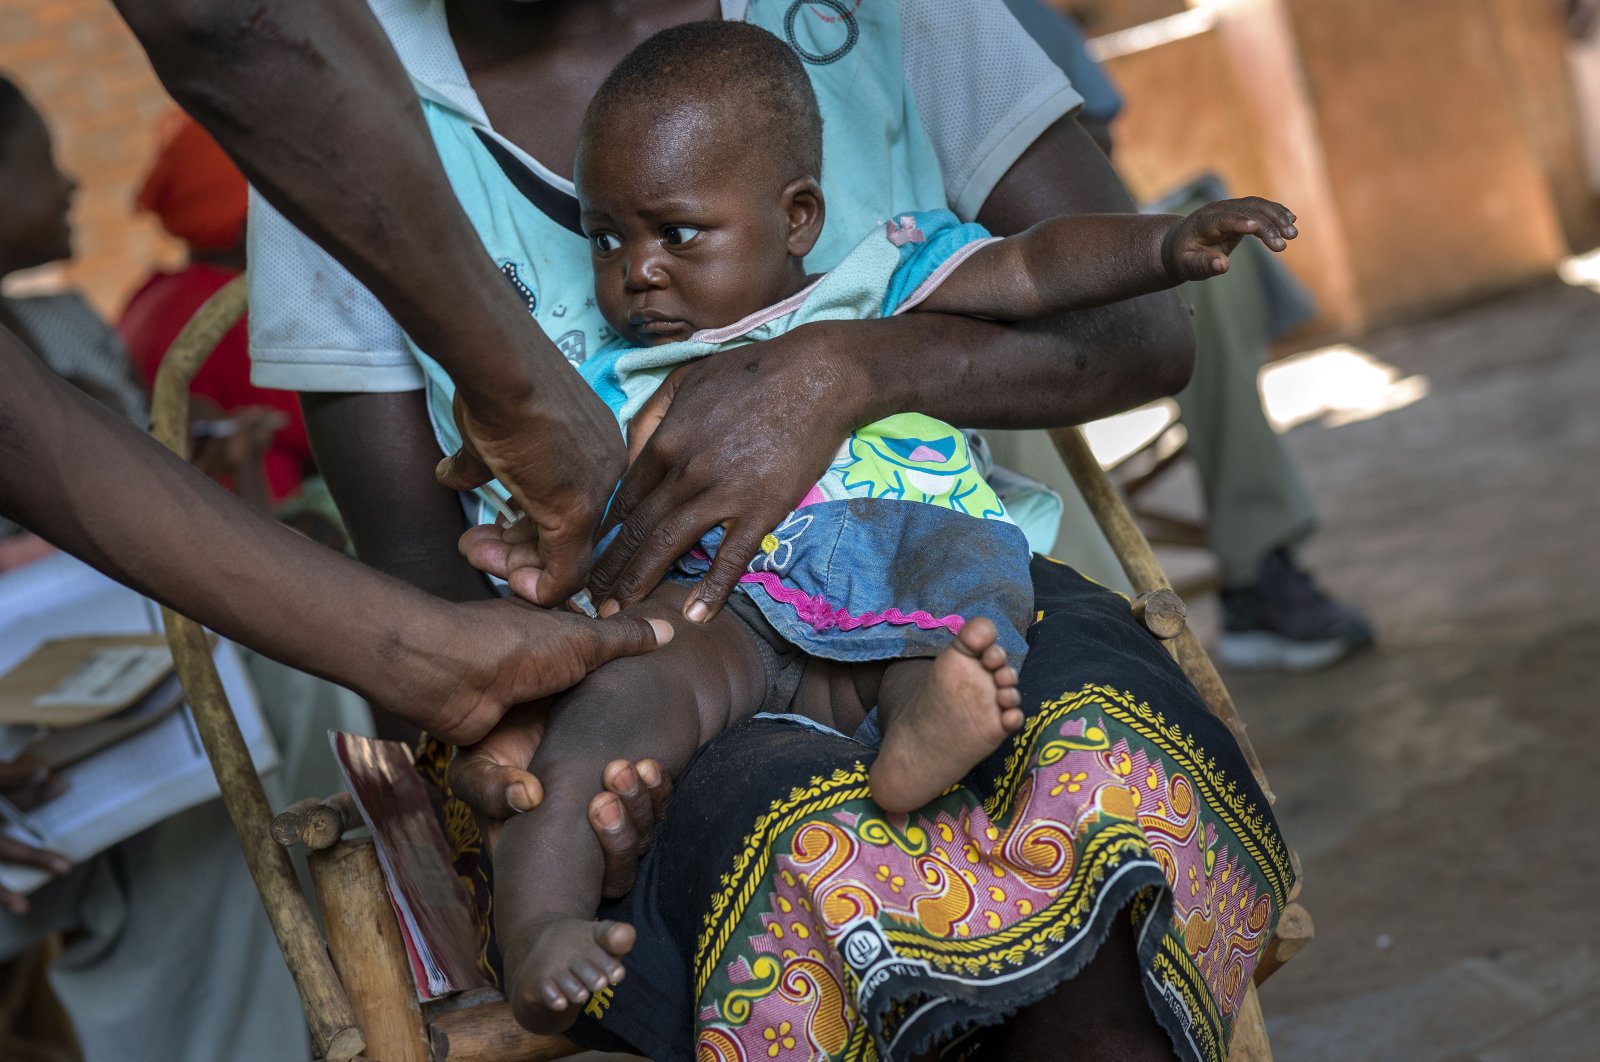 A baby from the Malawi village of Tomali is injected with the world's first vaccine against malaria in a pilot program, Dec. 11, 2019. (AP Photo)